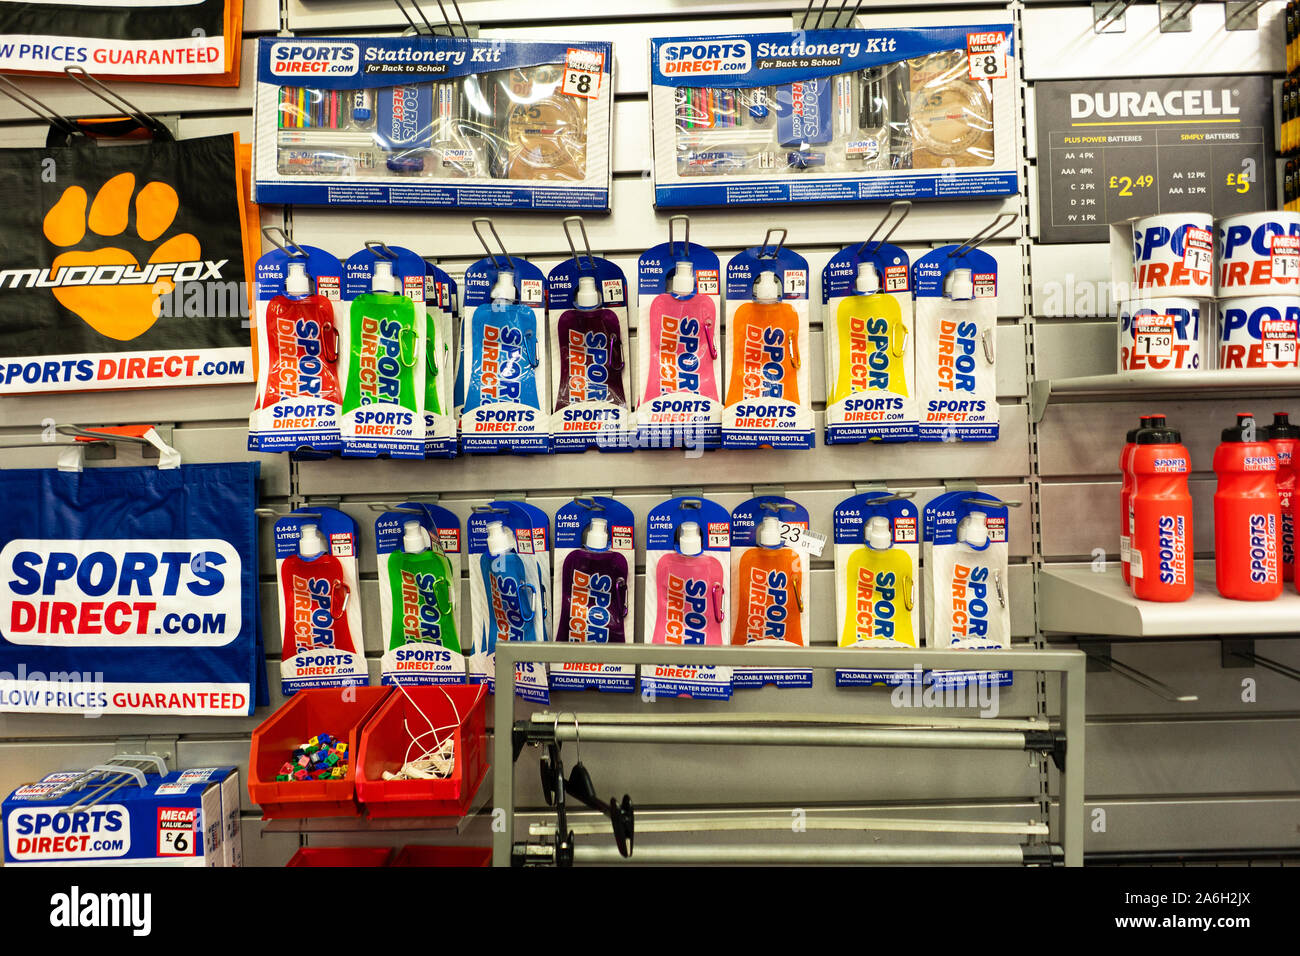 Water bottles, and containers for fluids for sale at Sports direct store in Stoke on Trent, Sports retailer Stock Photo